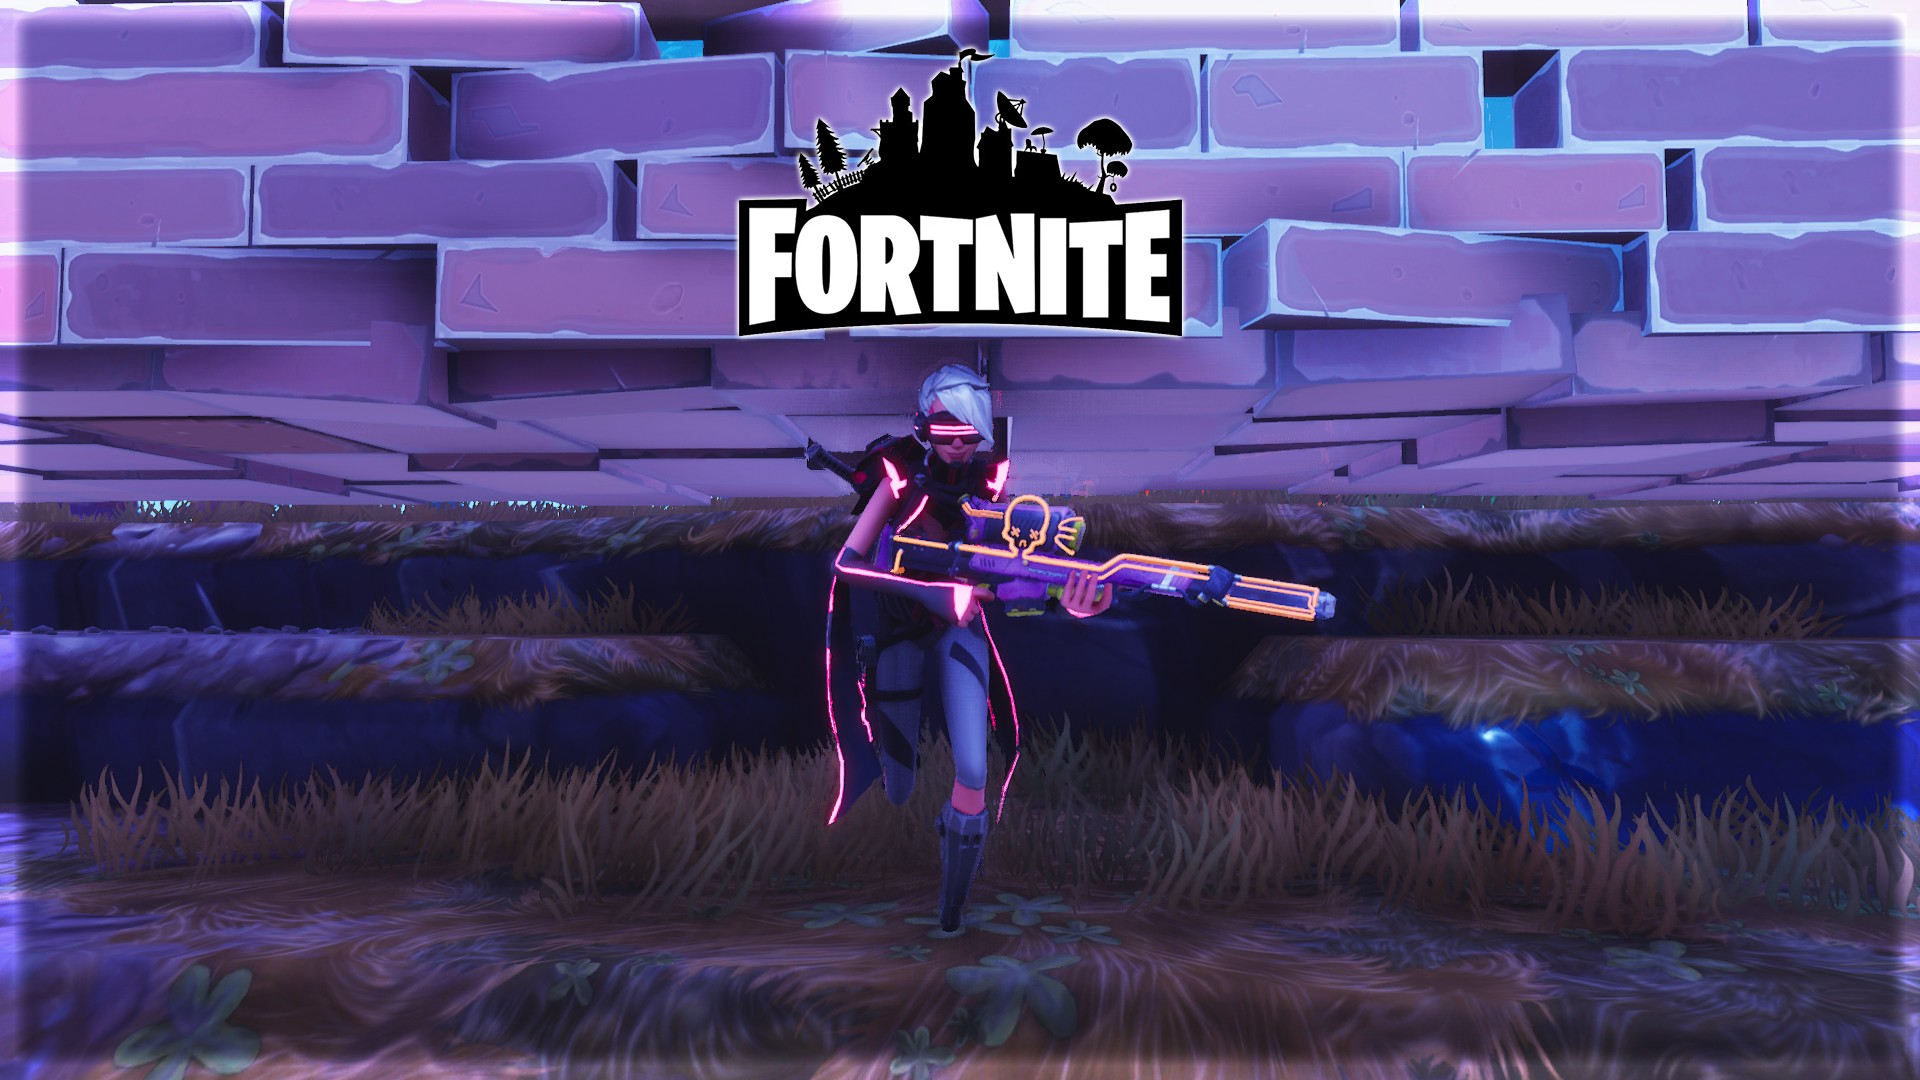 Desktop Wallpaper Fortnite With high-resolution 1920X1080 pixel. You can use this wallpaper for your Windows and Mac OS computers as well as your Android and iPhone smartphones